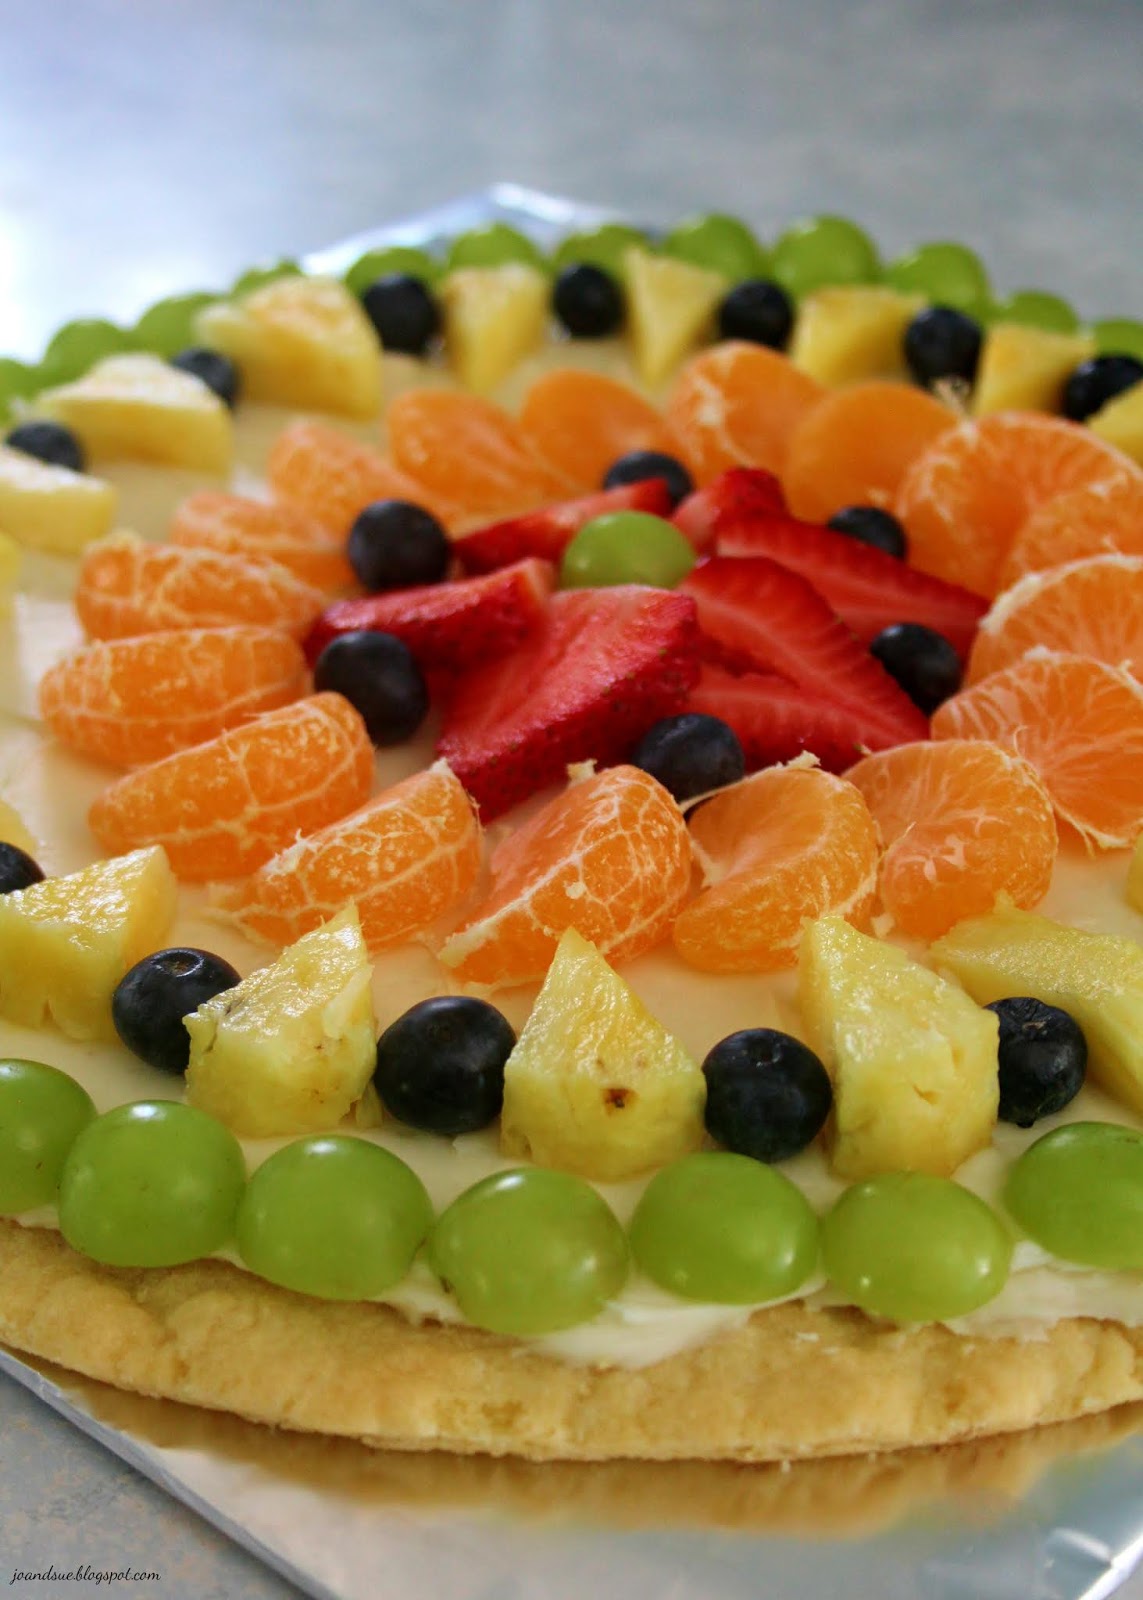 Jo and Sue: Fruit Pizza